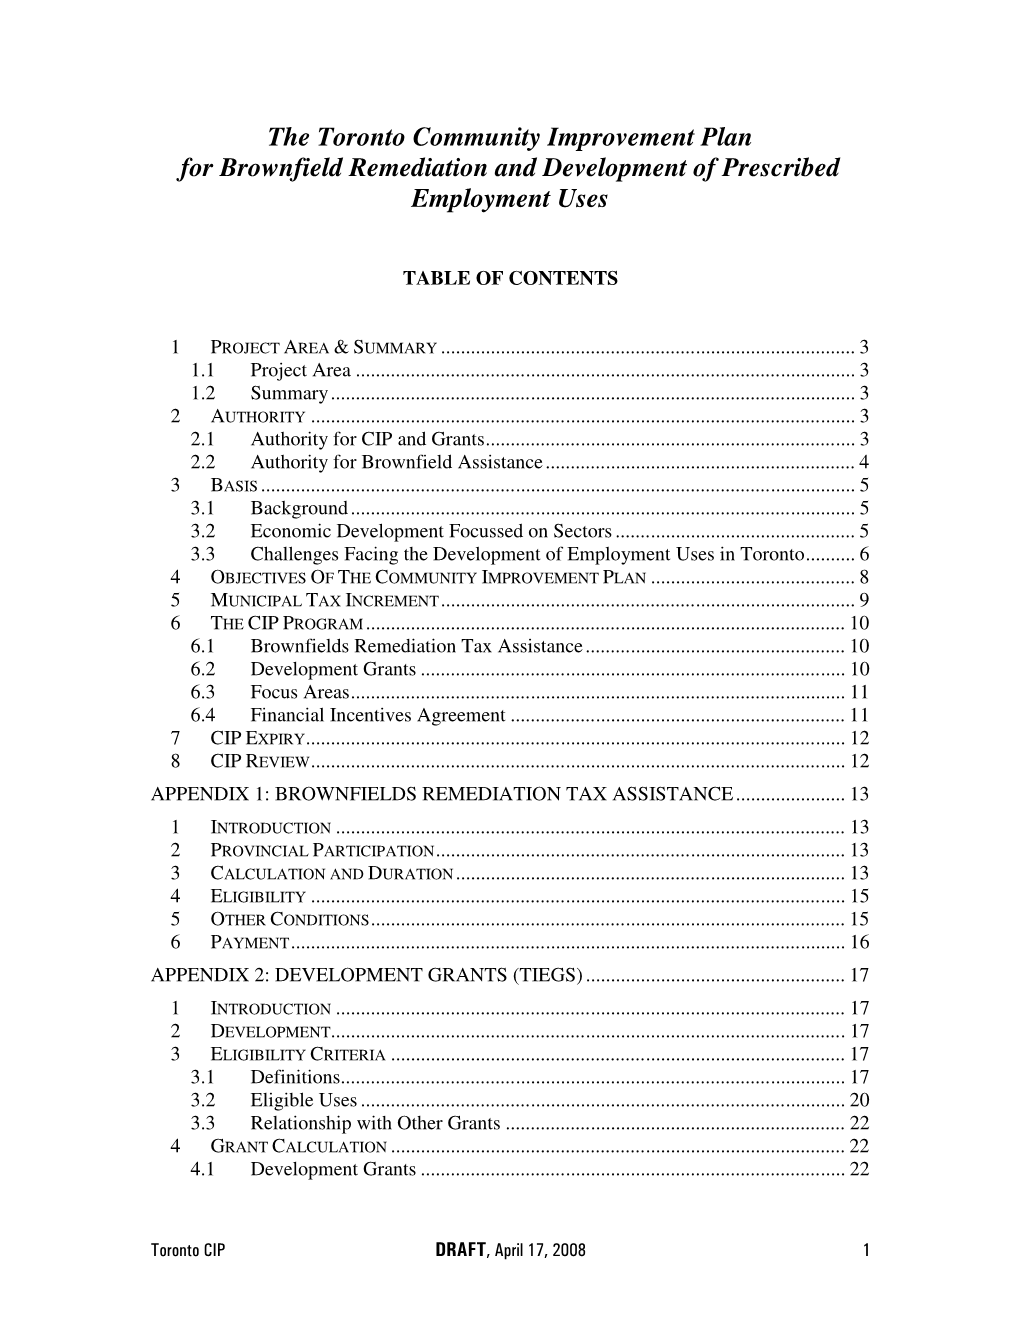 The Toronto Community Improvement Plan for Brownfield Remediation and Development of Prescribed Employment Uses